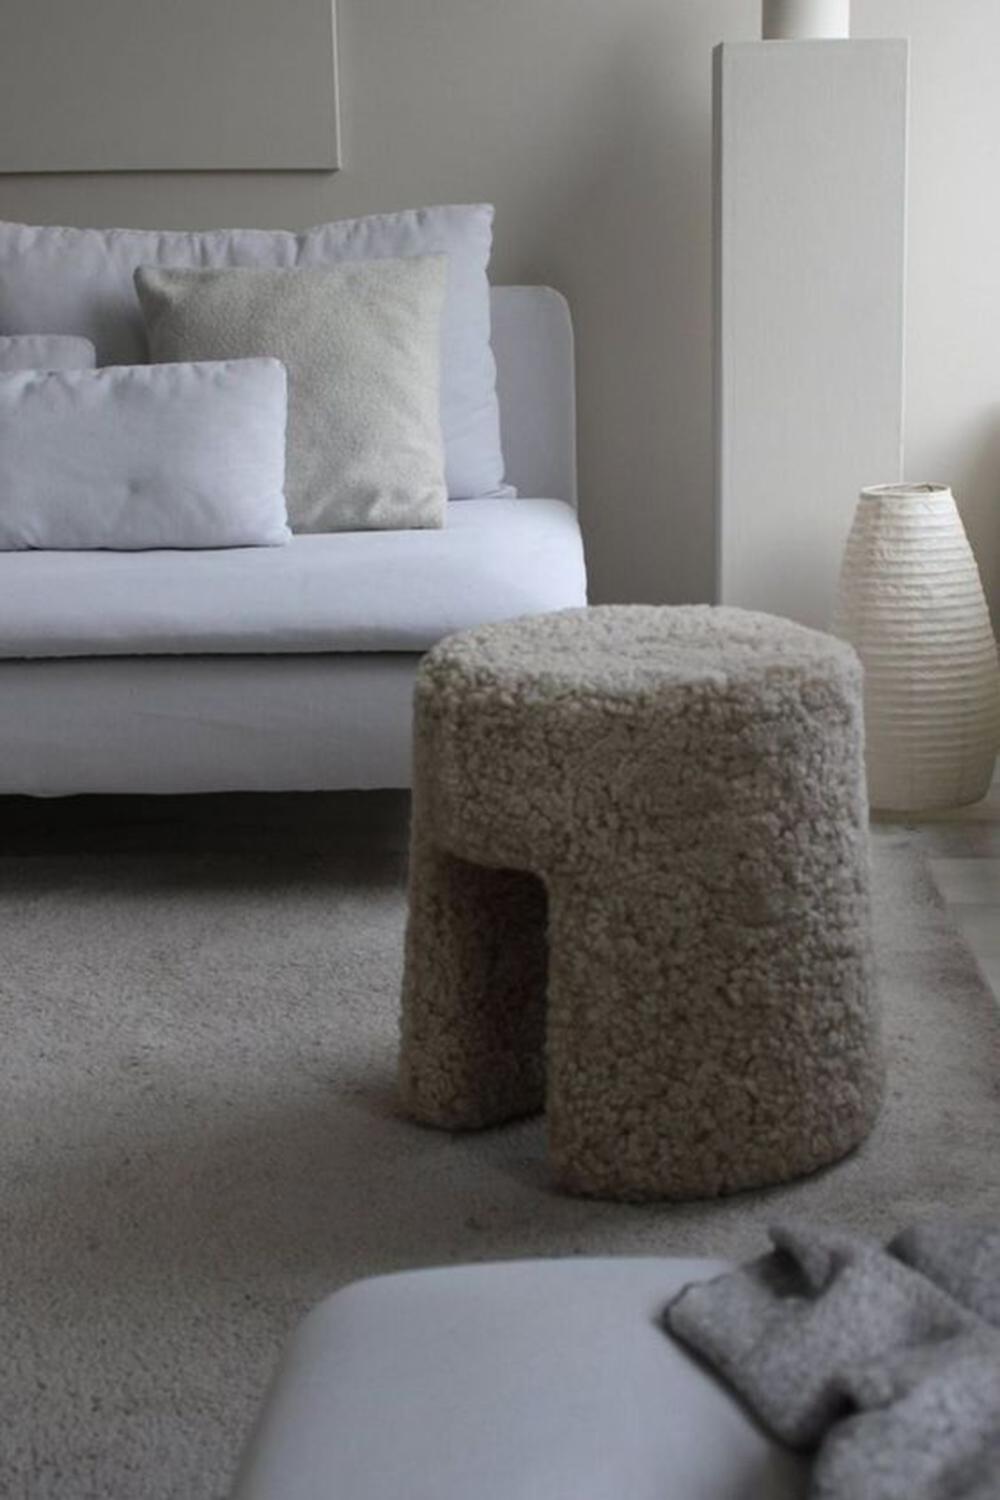 Danish Pair of Sheepskin Moonlight Sequoia Pouf by Space Copenhagen for Fredericia  For Sale